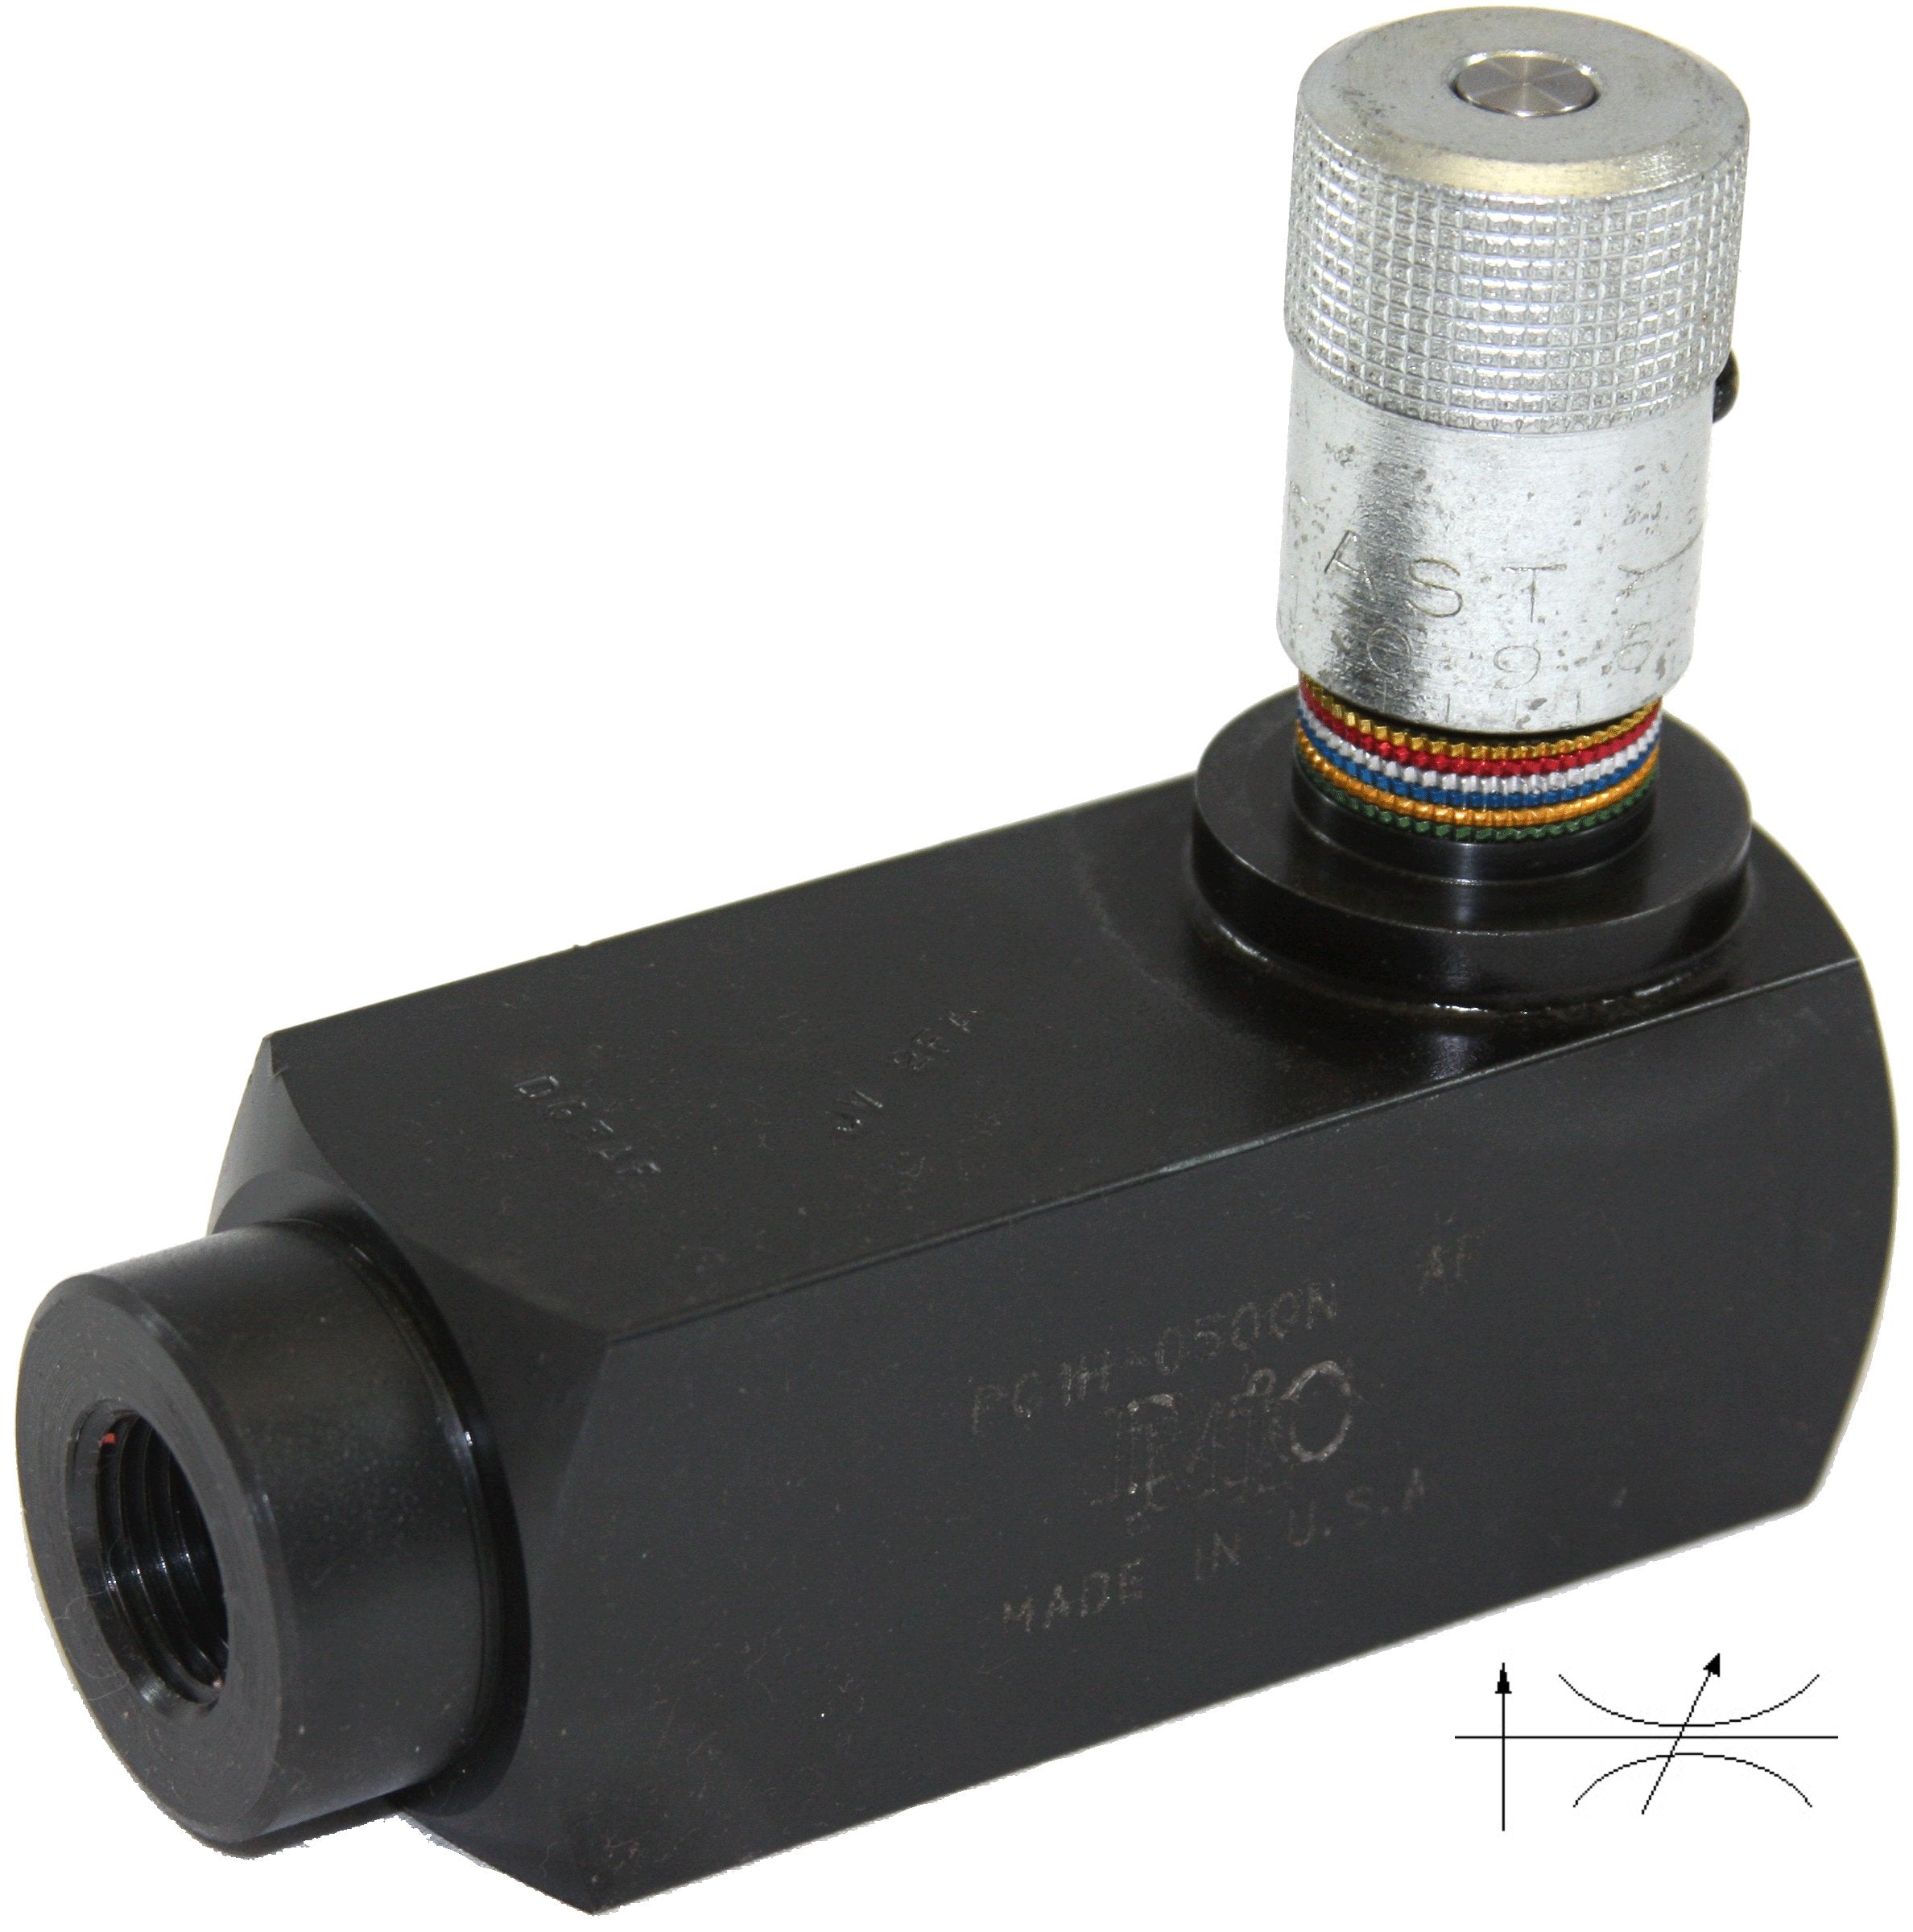 PC1H-0500N : DMIC Pressure Comp Flow Control, Unidirectional, Metered, with Check, 1/2" NPT, 3000psi, Carbon Steel